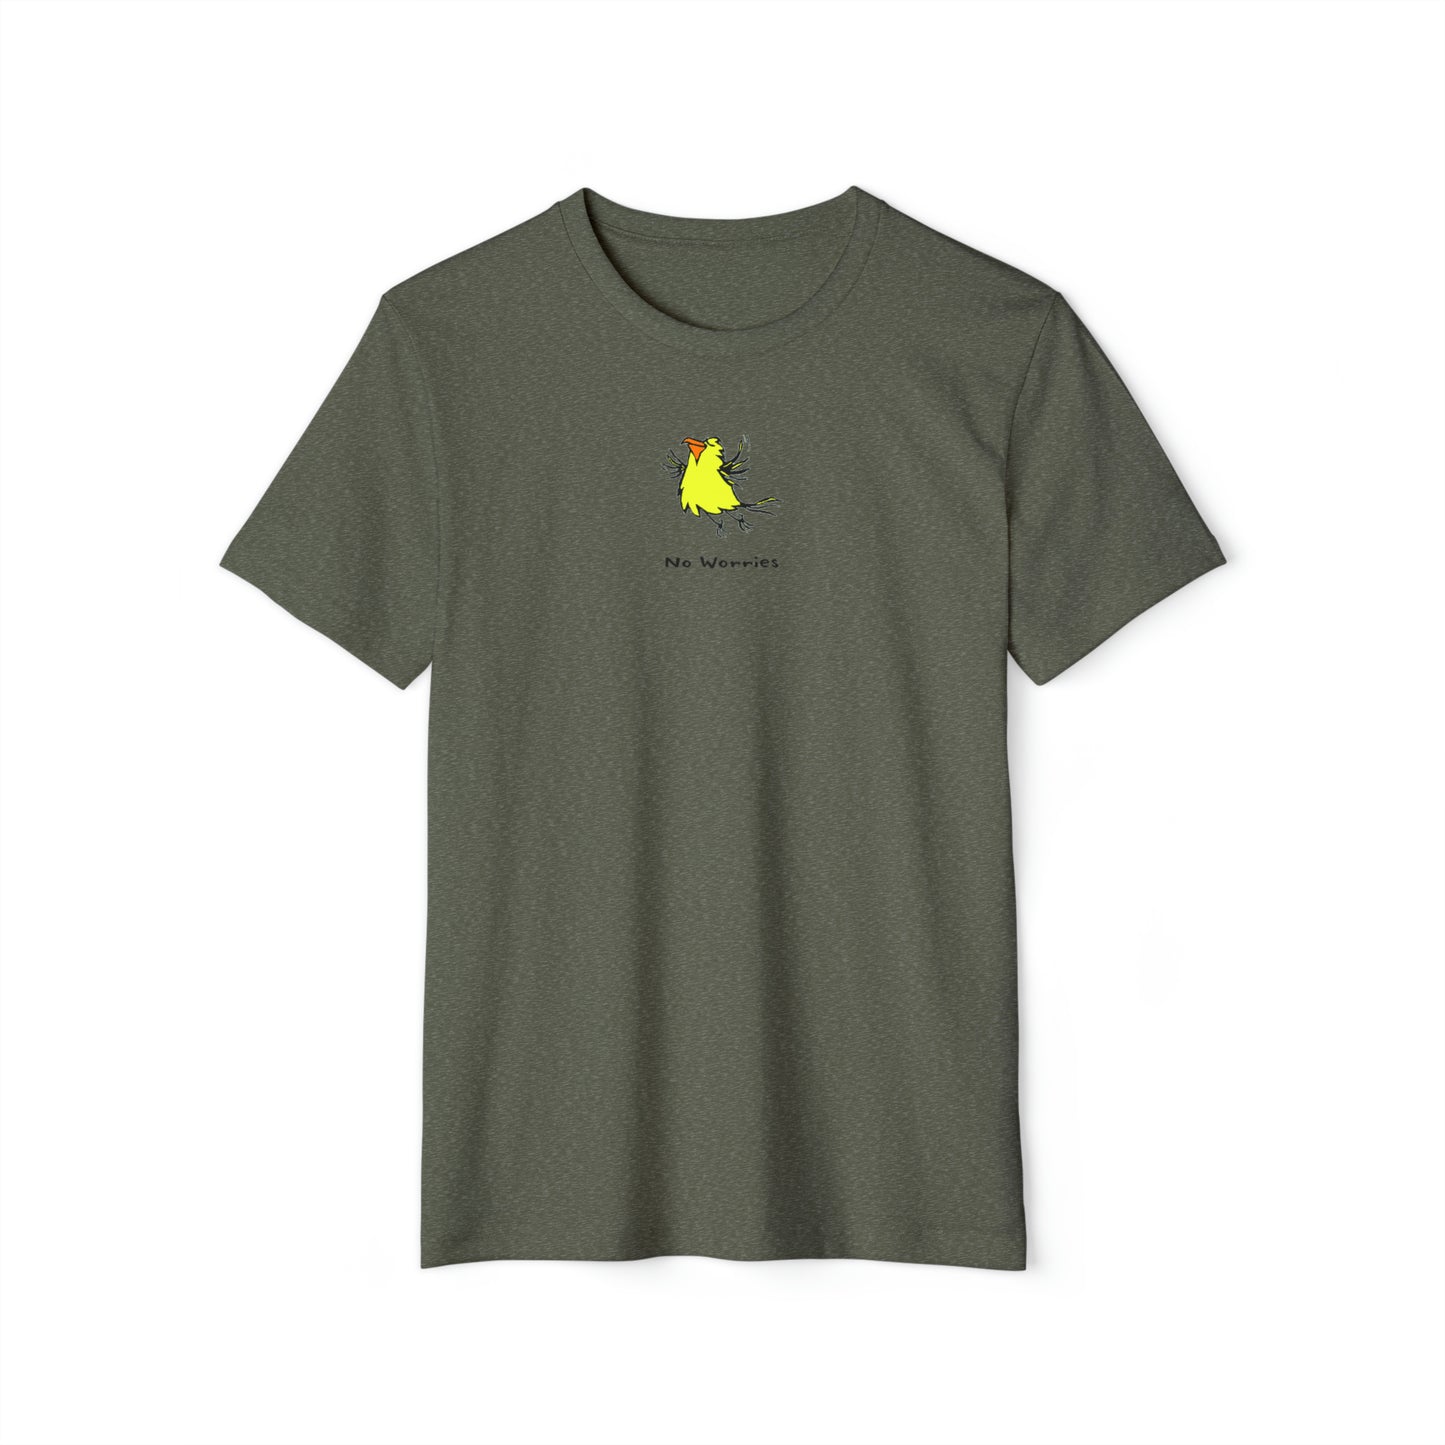 Yellow flying bird with orange beak on heather military green color unisex men's t-shirt. Text under image says No Worries